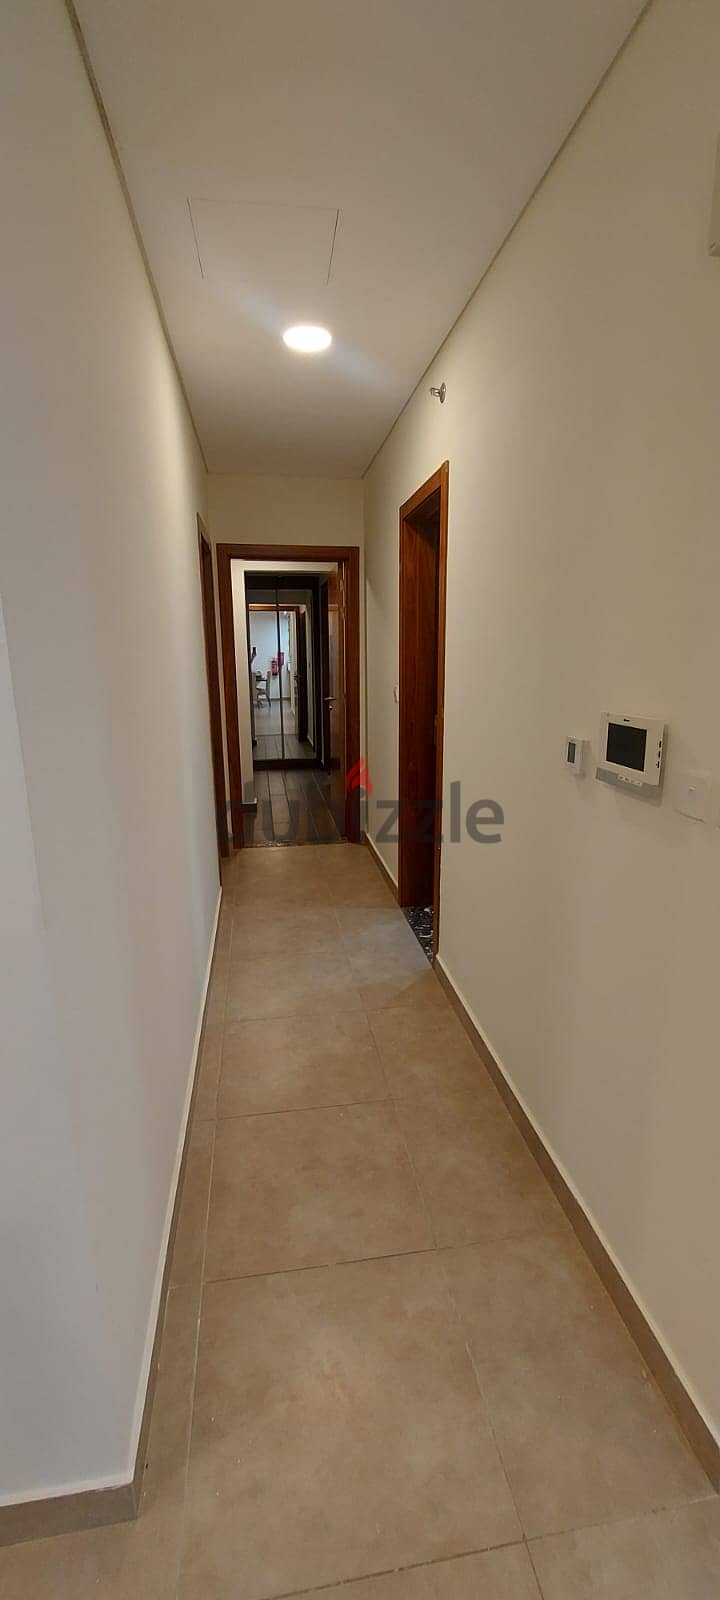 For sale apartment 2BHK in Erkyah City, Lusail City 5